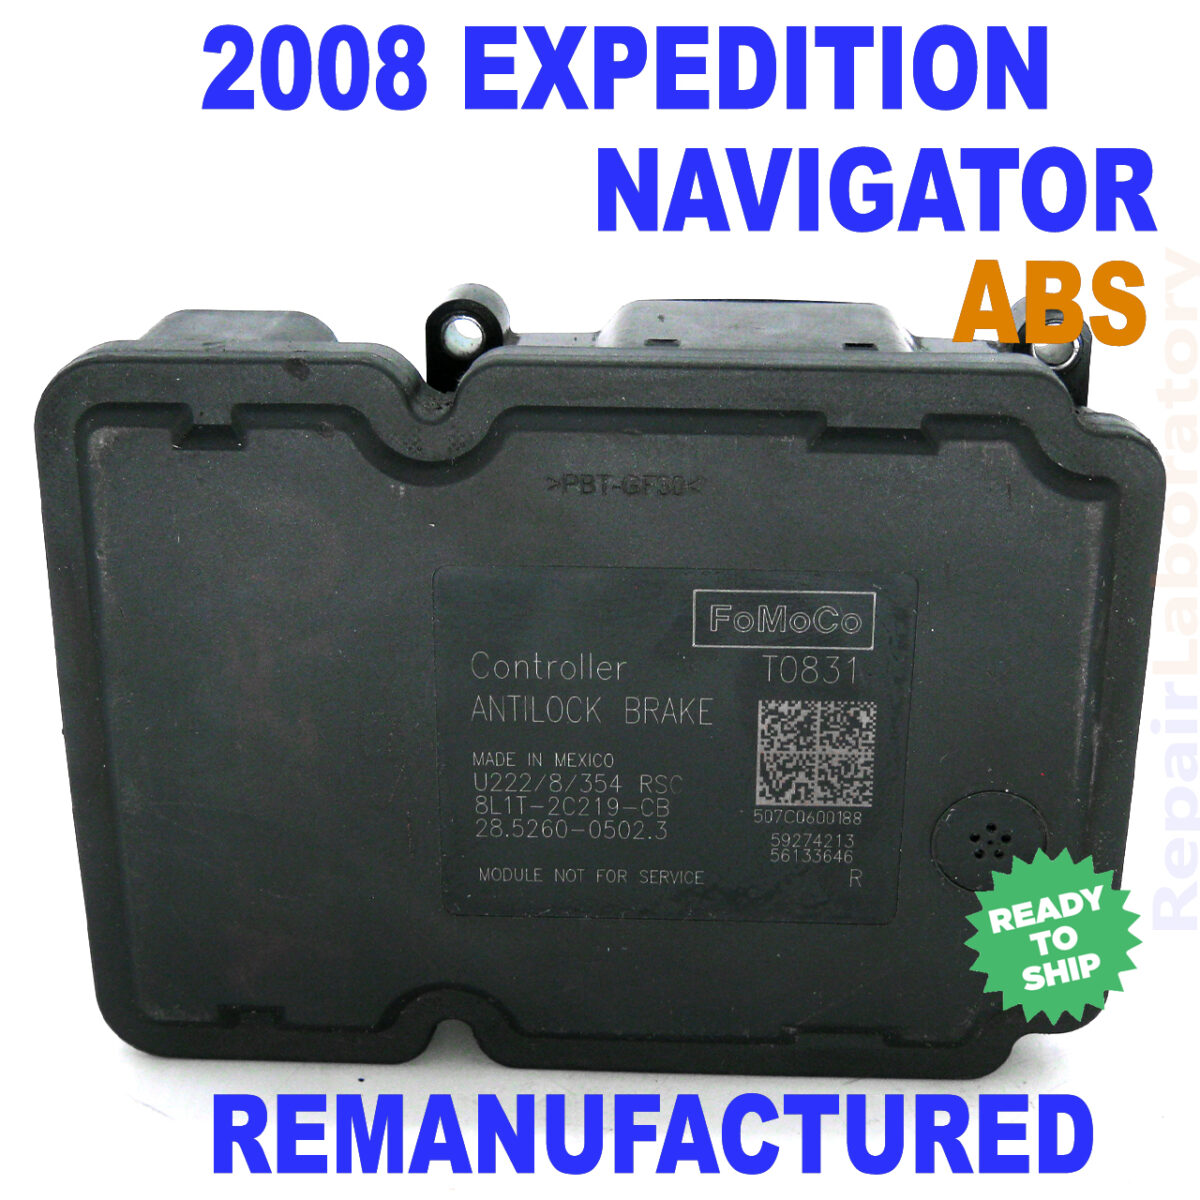 2008_expedition_navigator_abs_control _module_8L14-2C219-CR